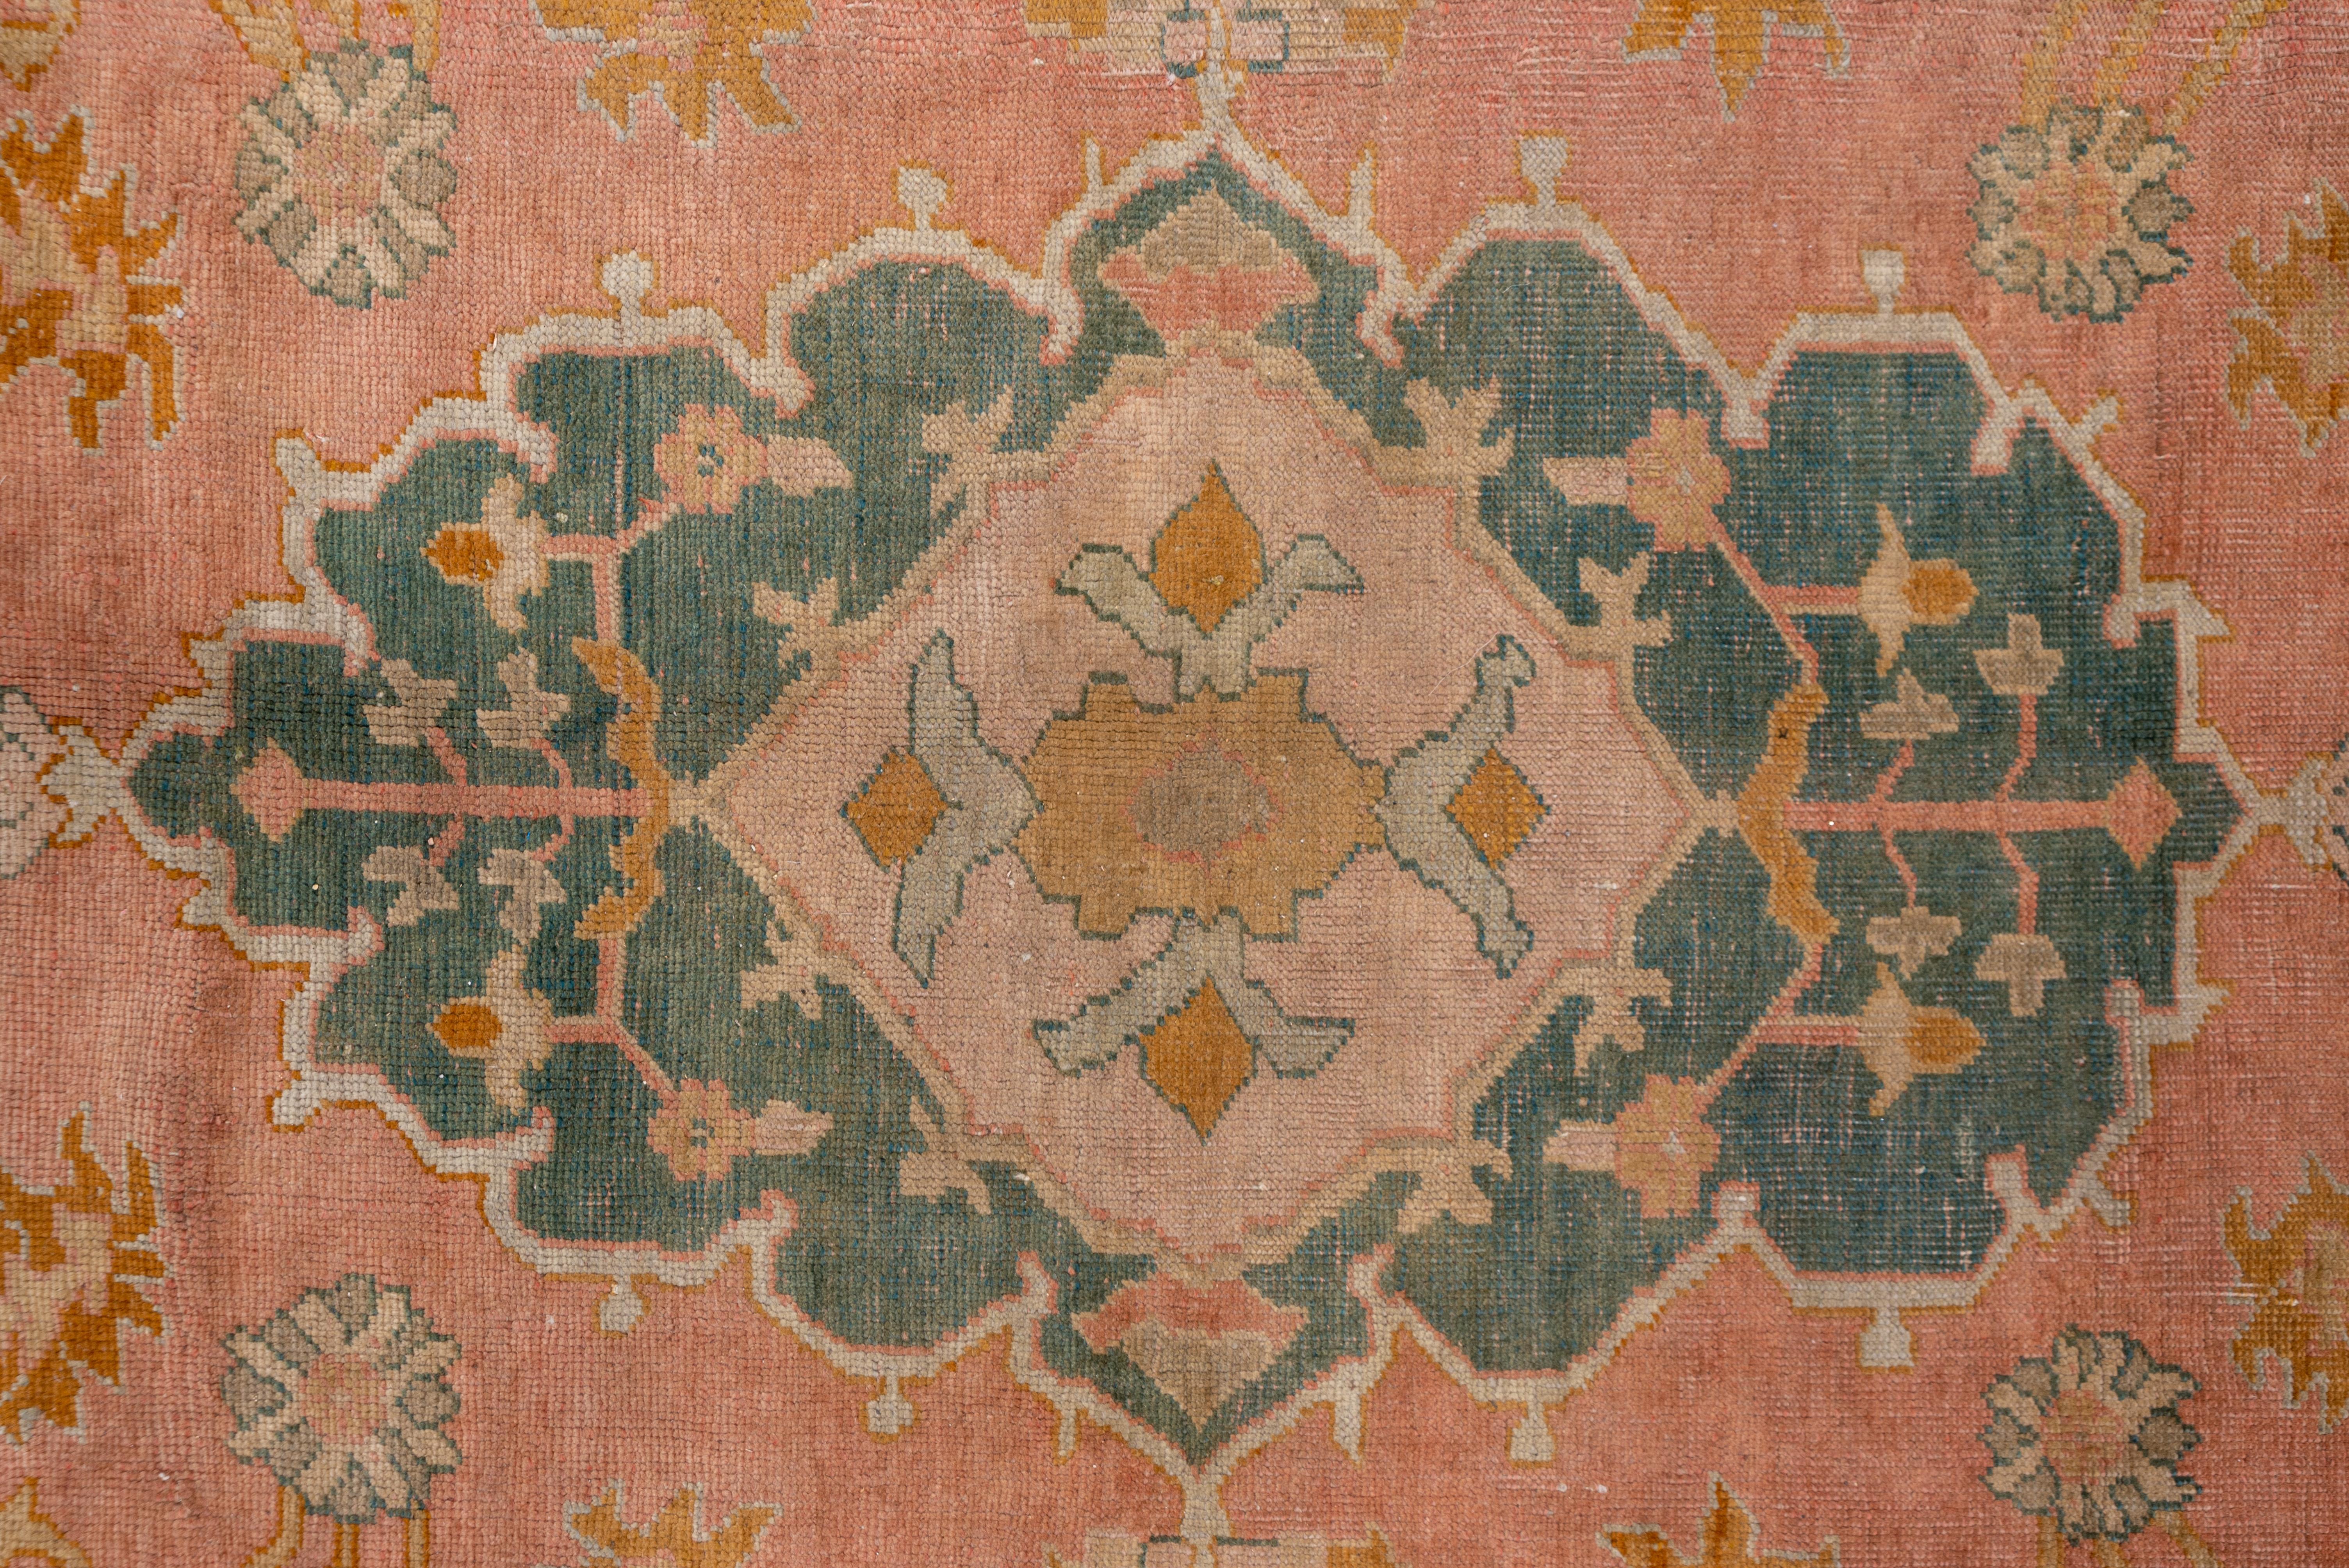 Early 20th Century 1910s Antique Turkish Oushak Rug, Pink FIeld, Dark Green & Orange Borders For Sale